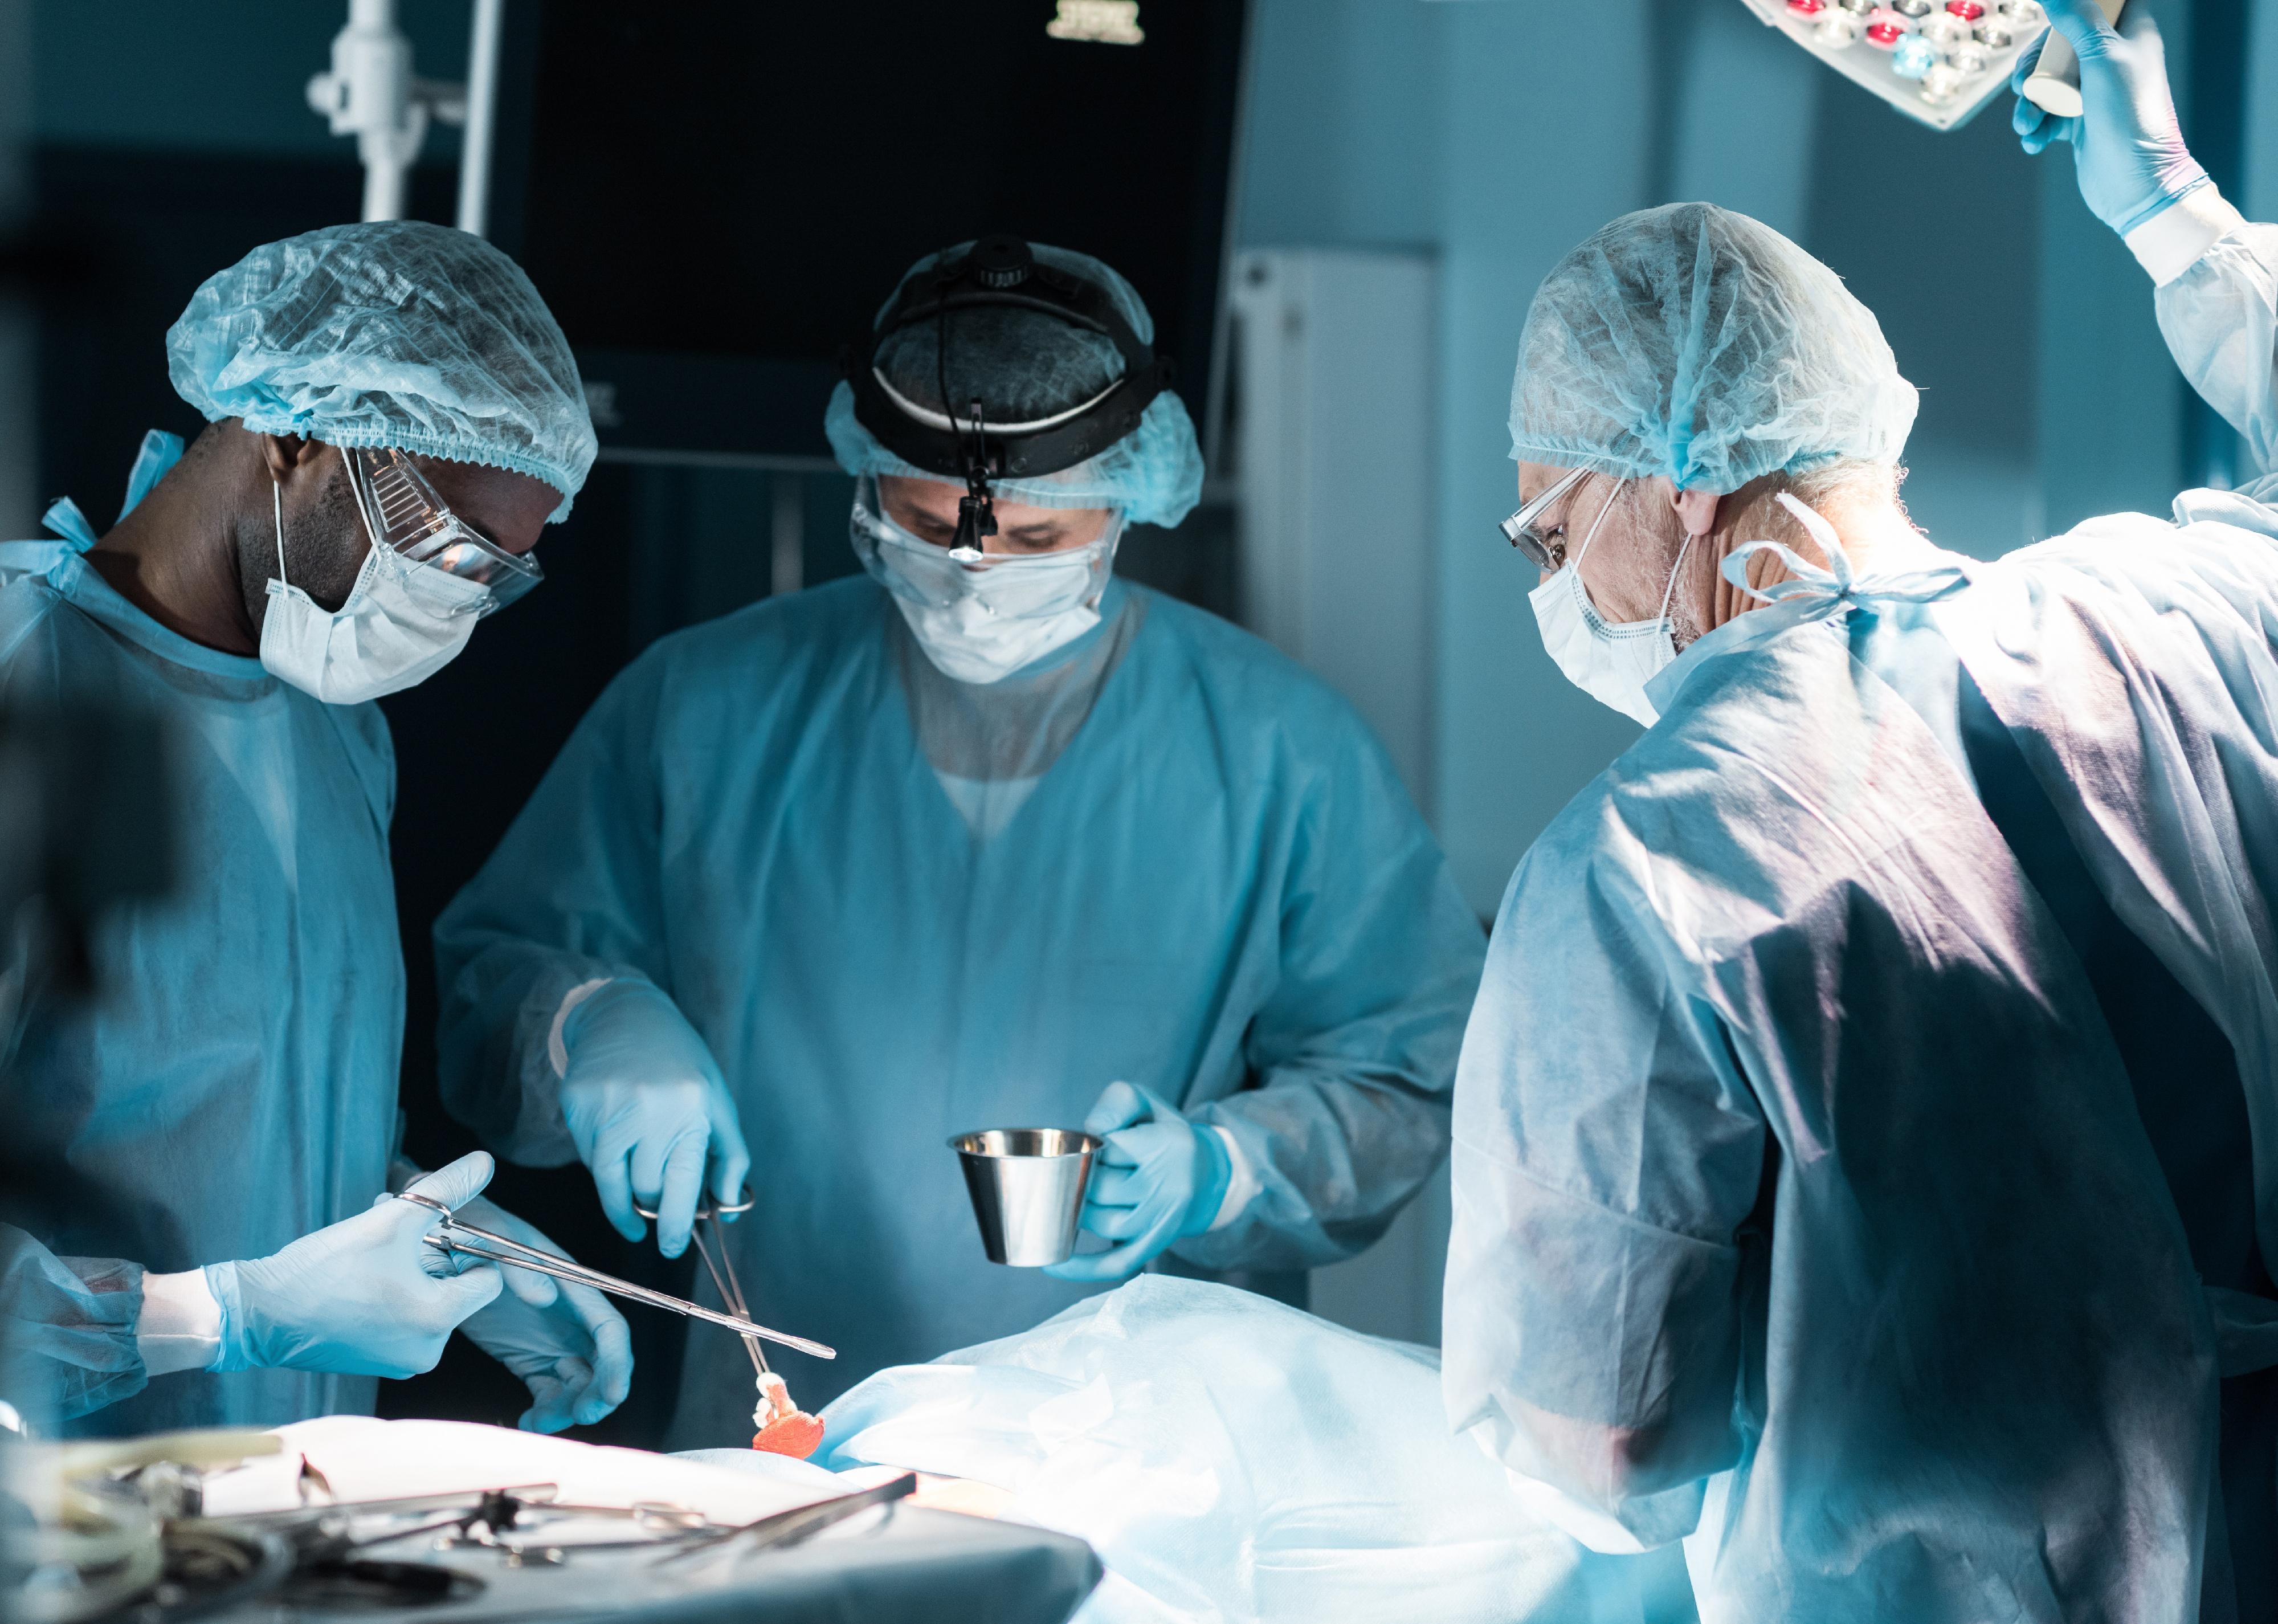 Surgeons in medical masks operating on a patient in operating room.